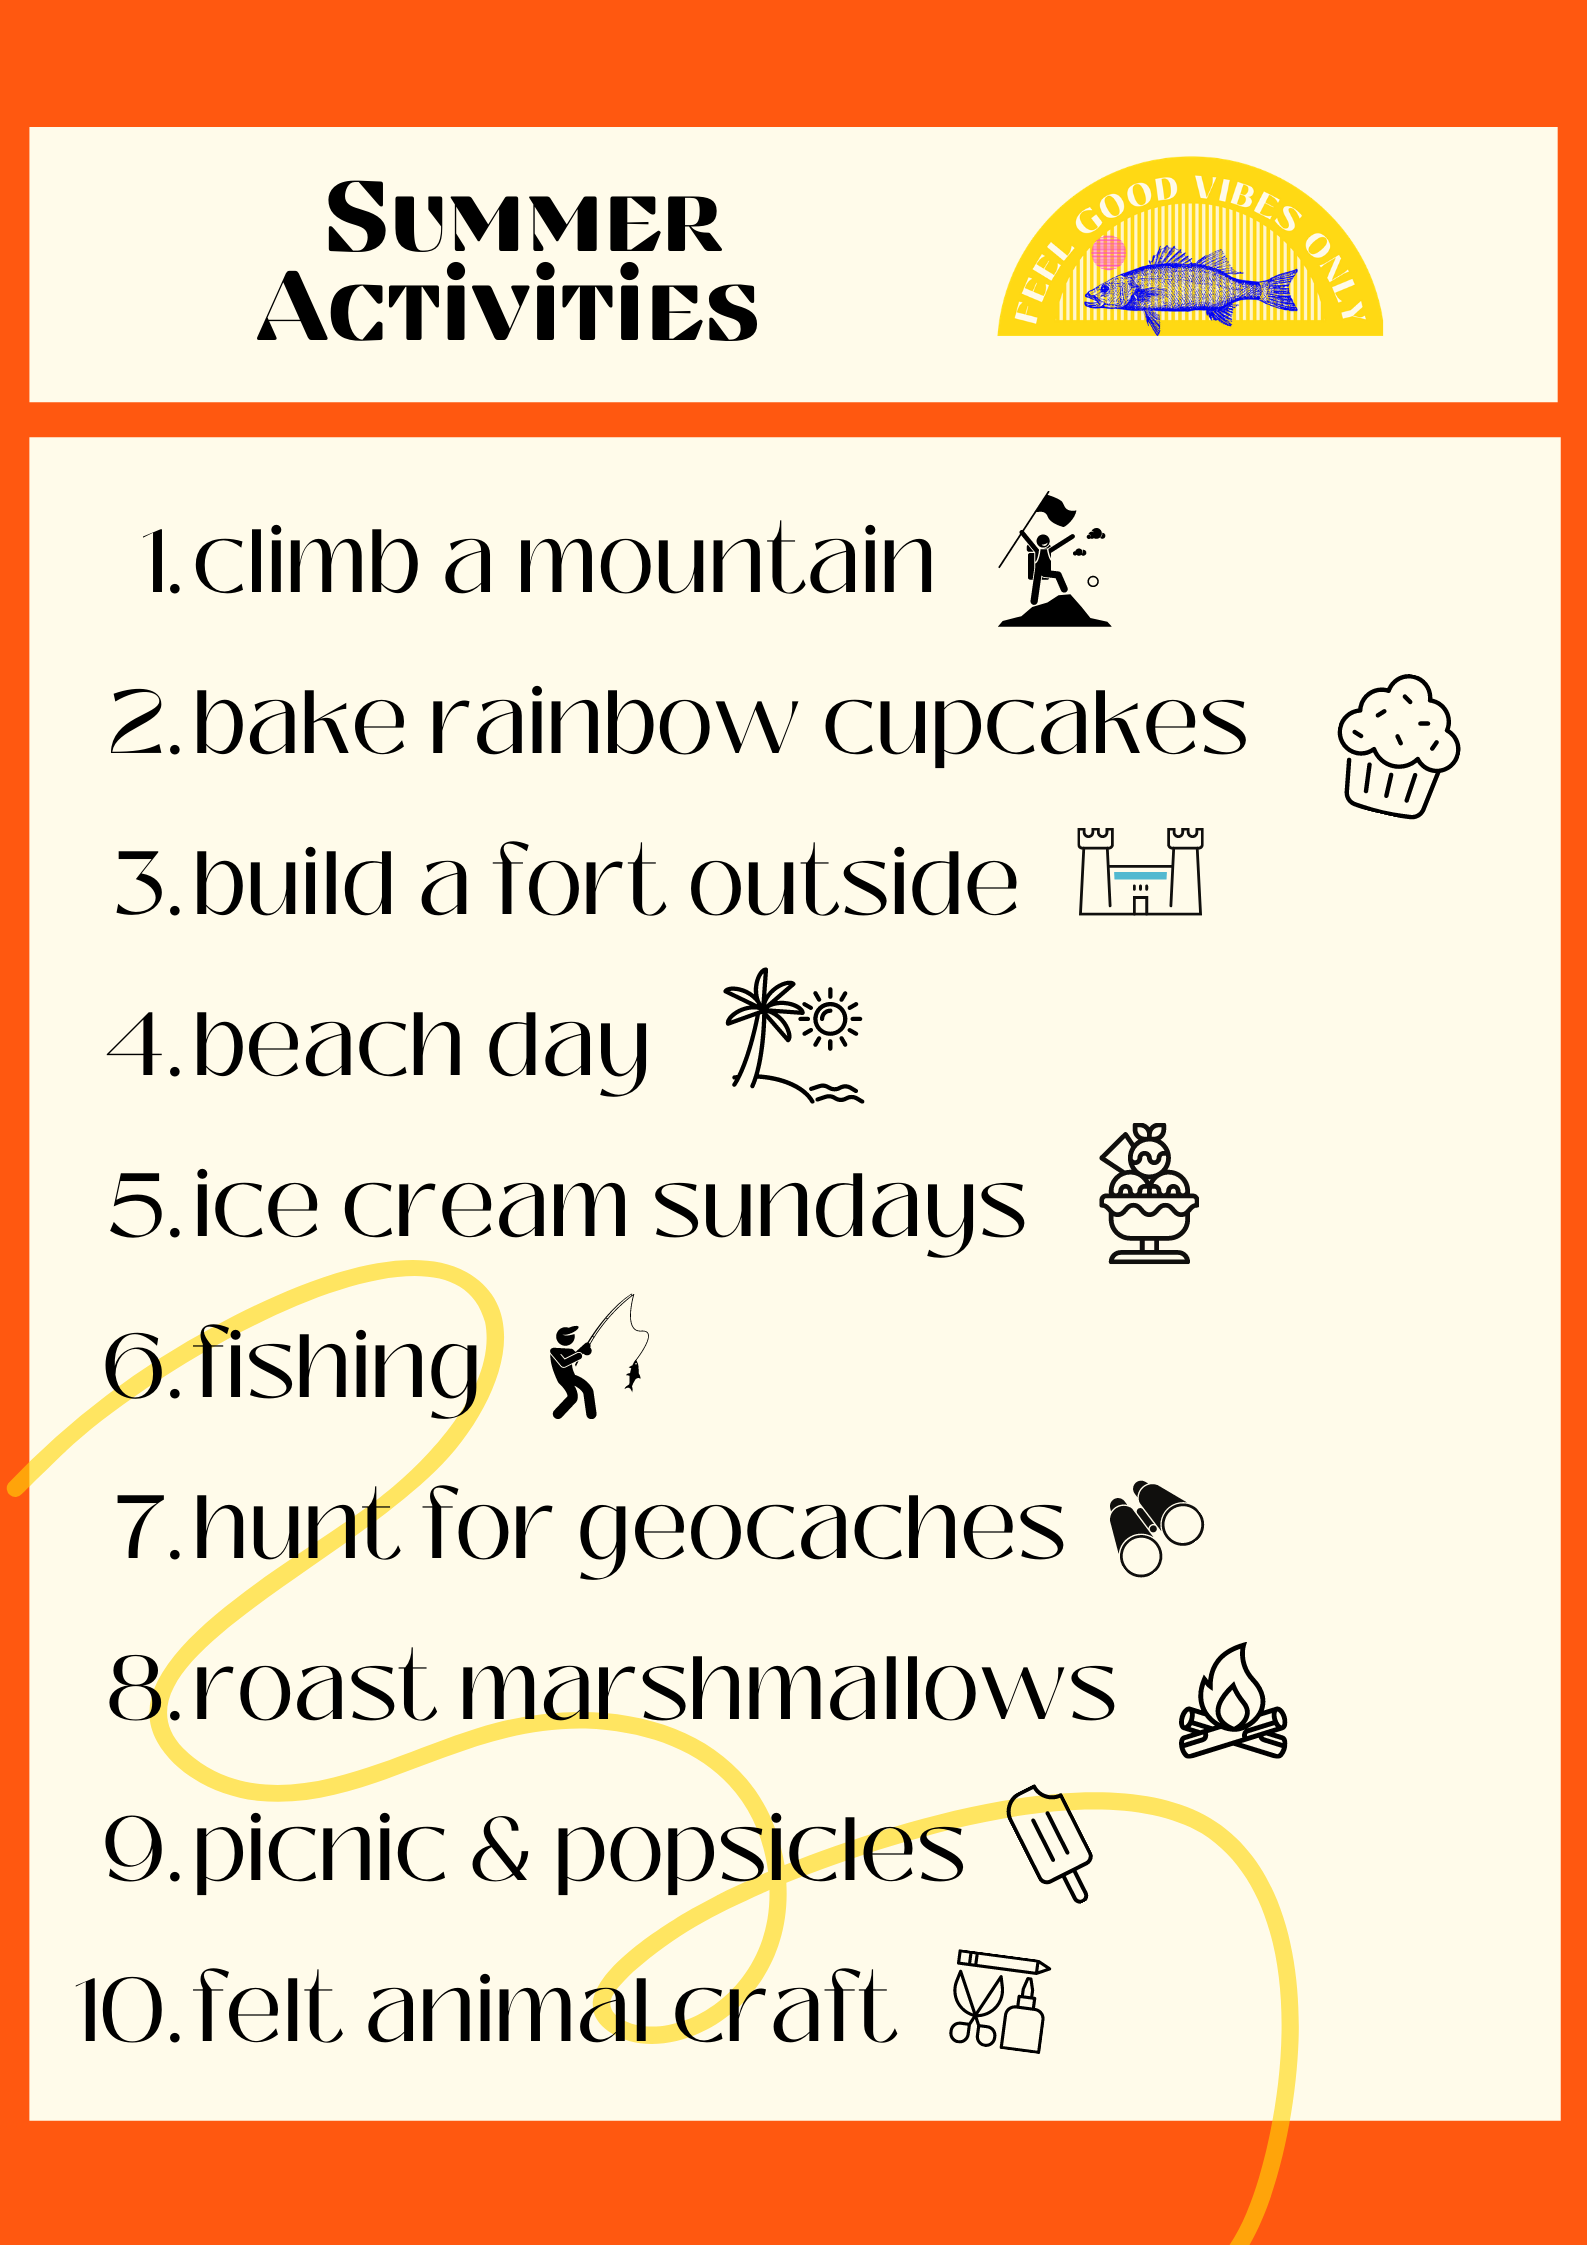 10 Activities to do this summer with your kids + FREE printable